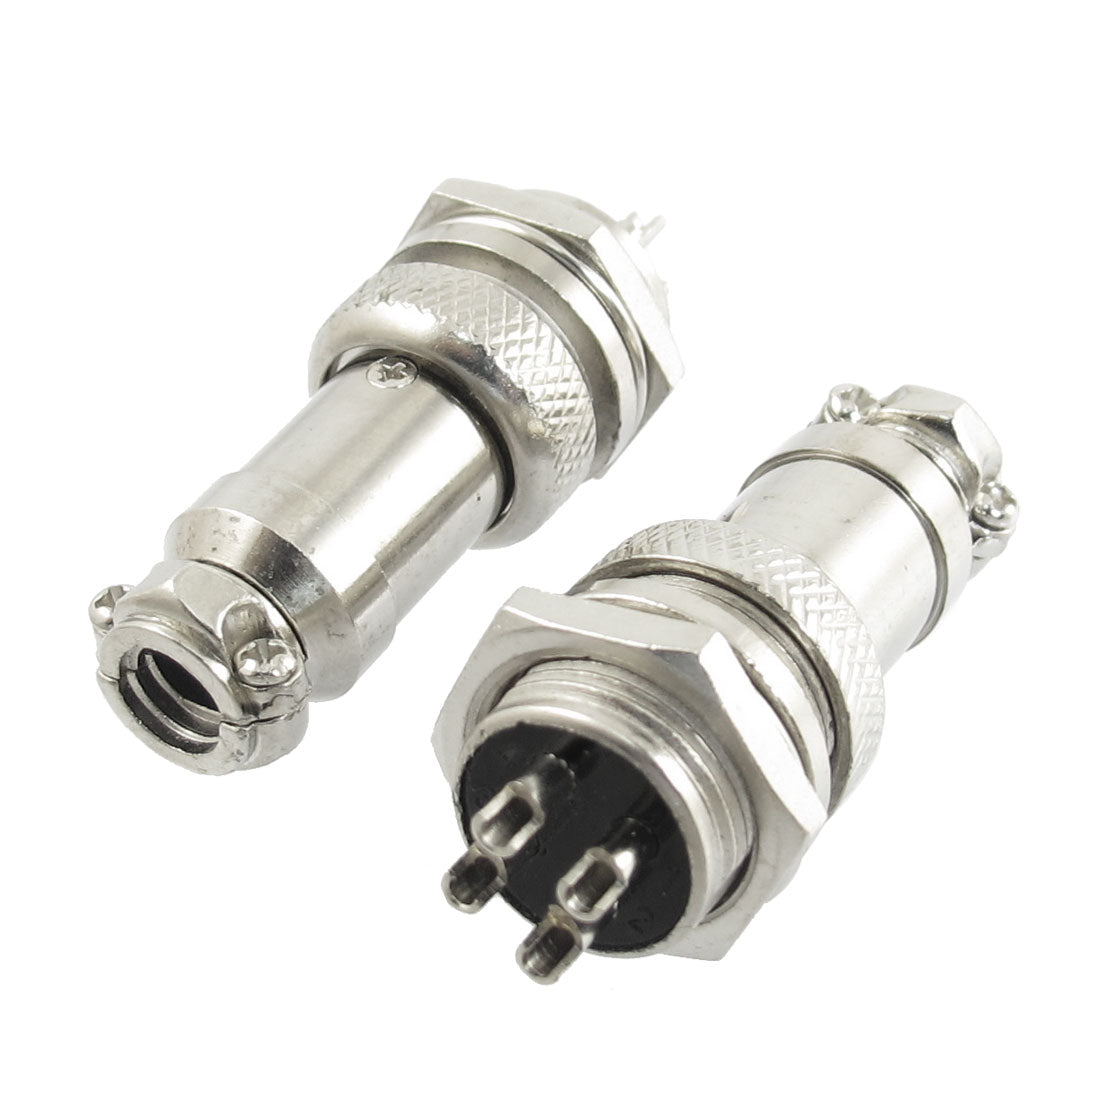 uxcell Uxcell AC 200V 5A 16mm Thread Dia 4-Pole 4 Pole Screw Aviation Connector 2Pcs